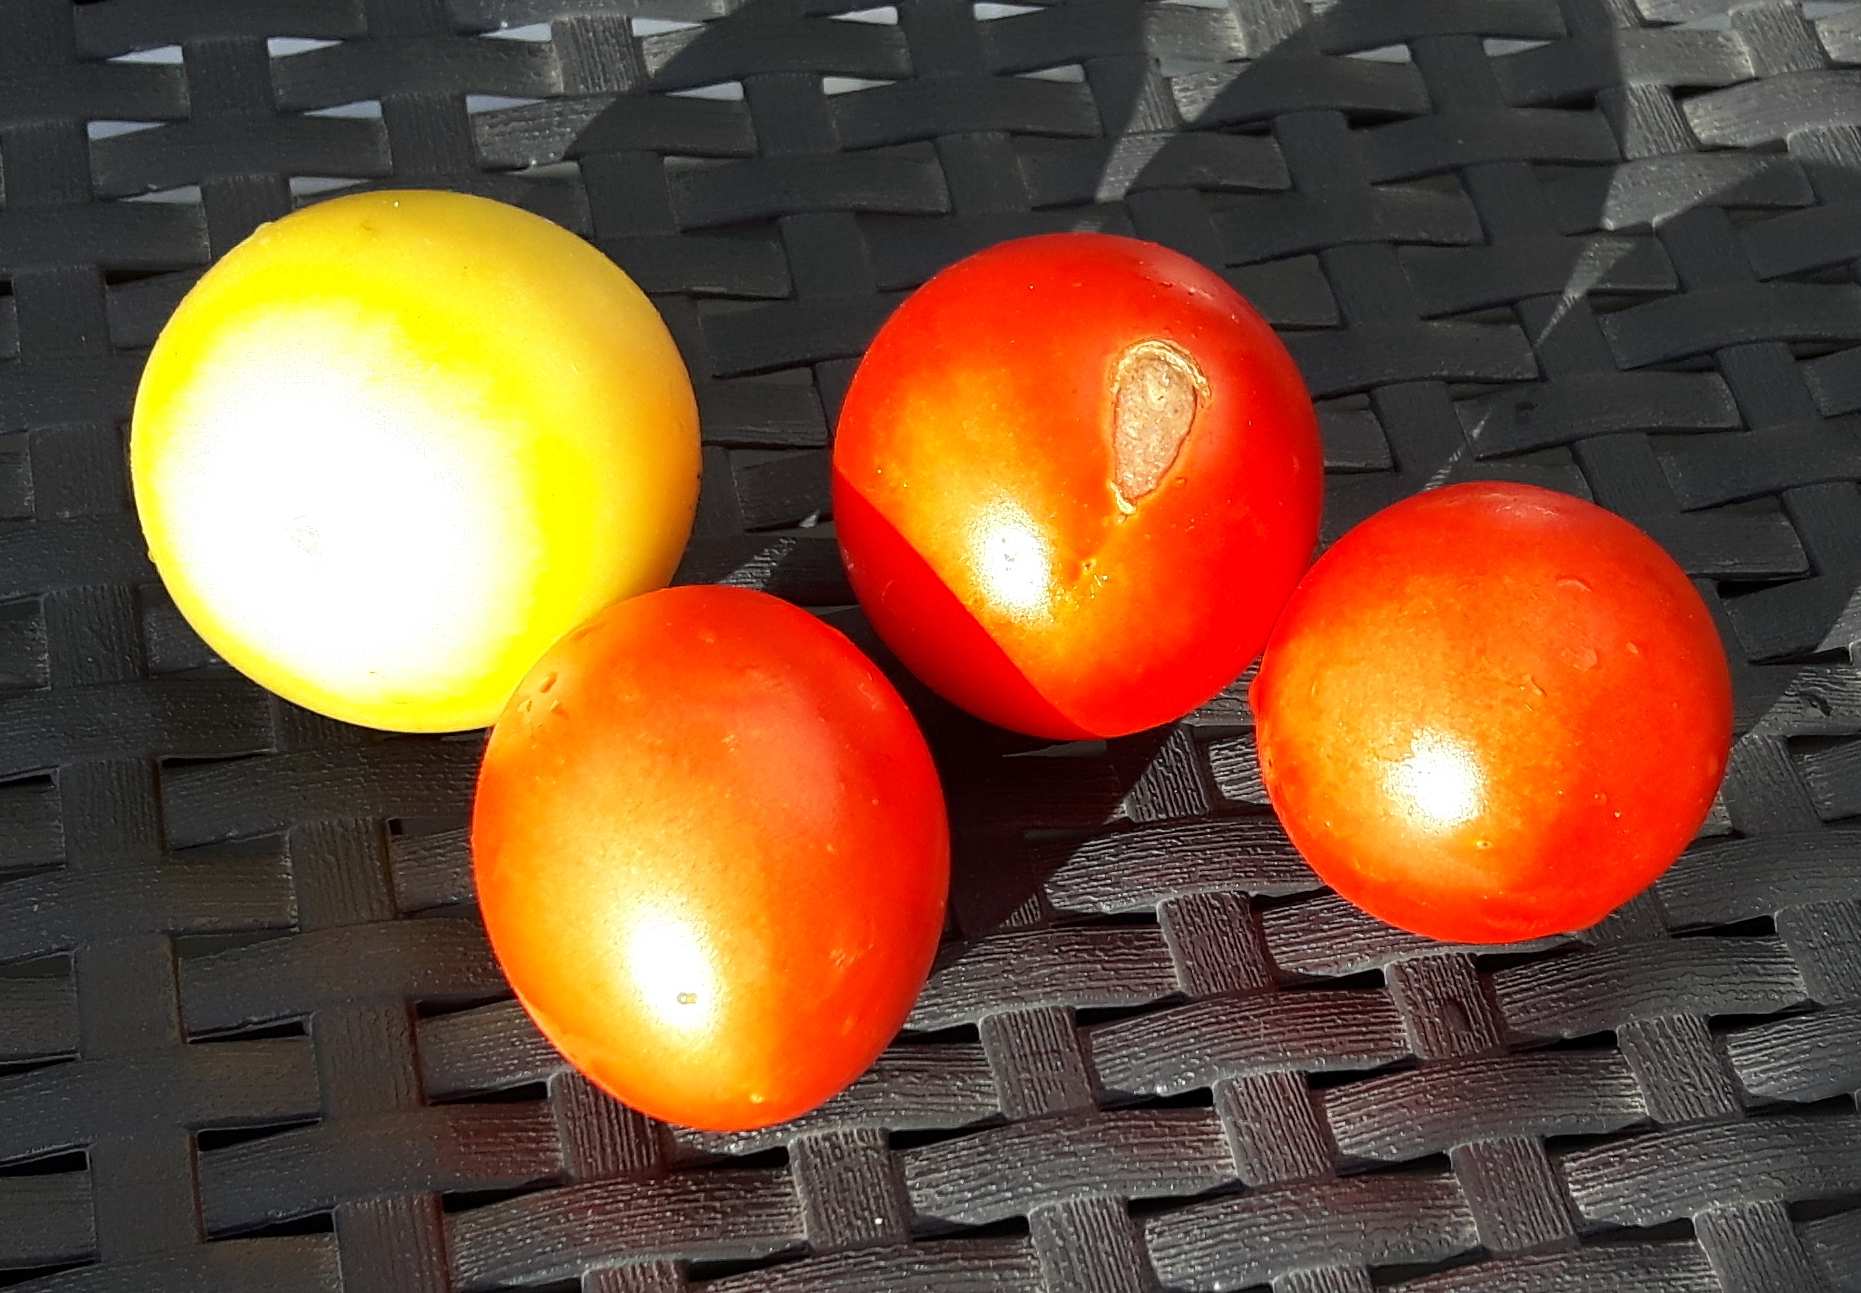 1:1 tomatoes by Pawel